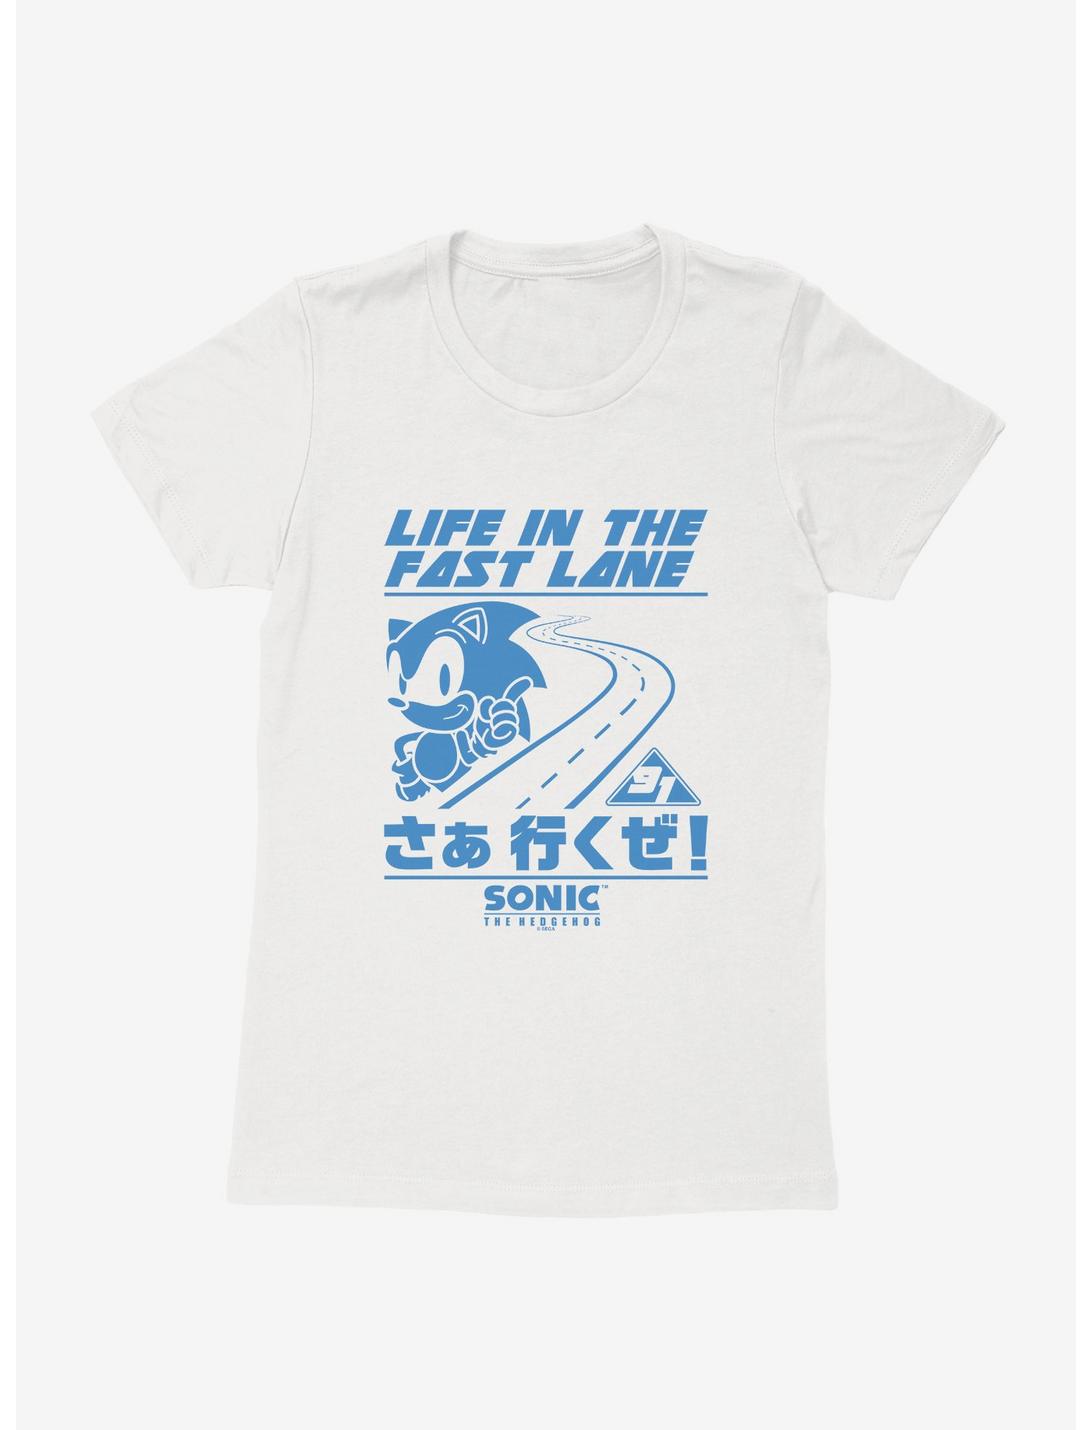 Sonic The Hedgehog Life In The Fast Lane Womens T-Shirt, WHITE, hi-res